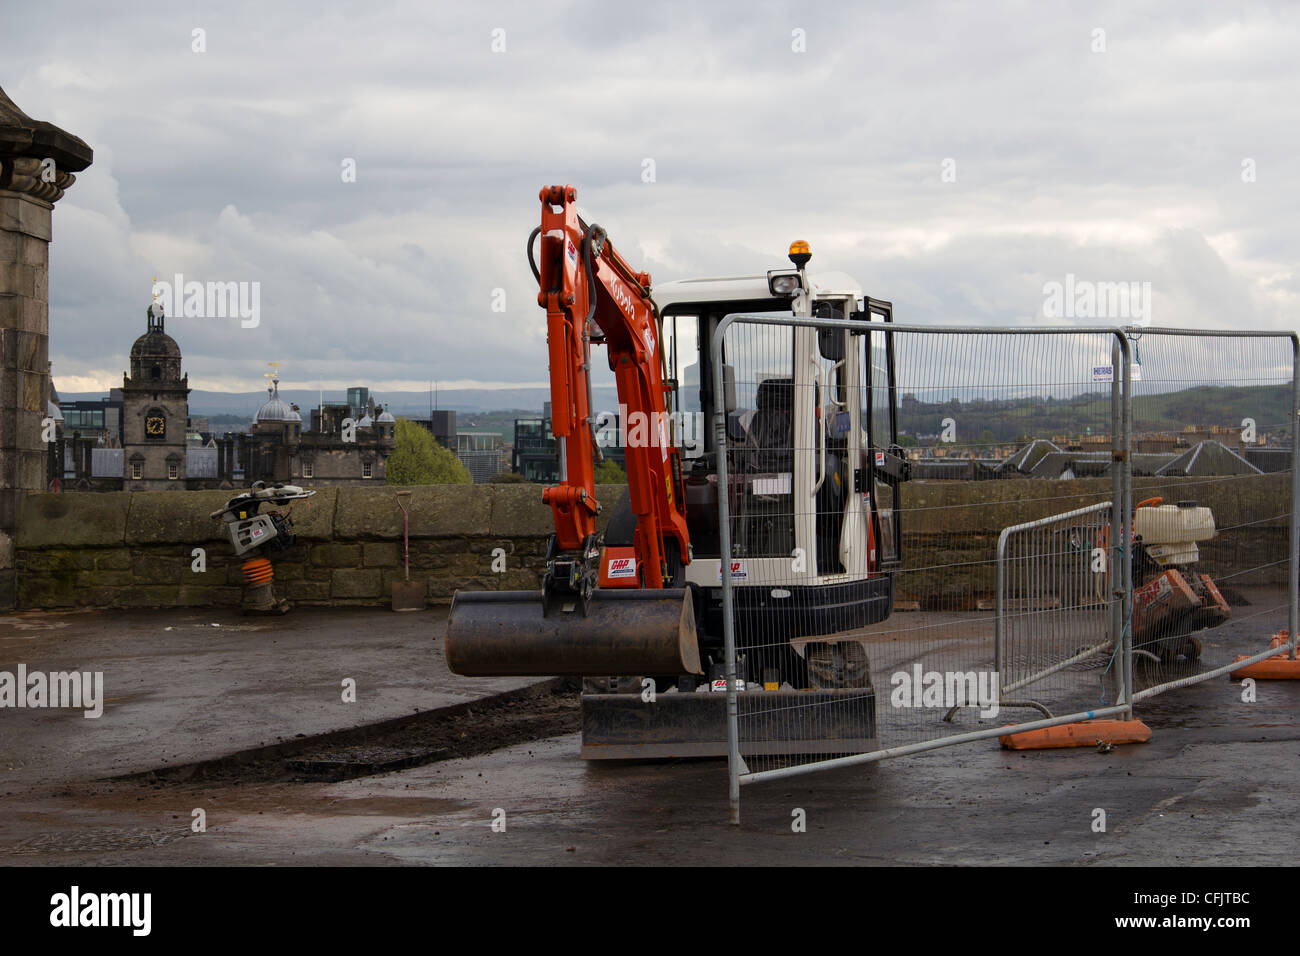 Repair work and equipment at Edinburgh Castle. This is in the large open area in front of the entrance, with a view of the city. Stock Photo